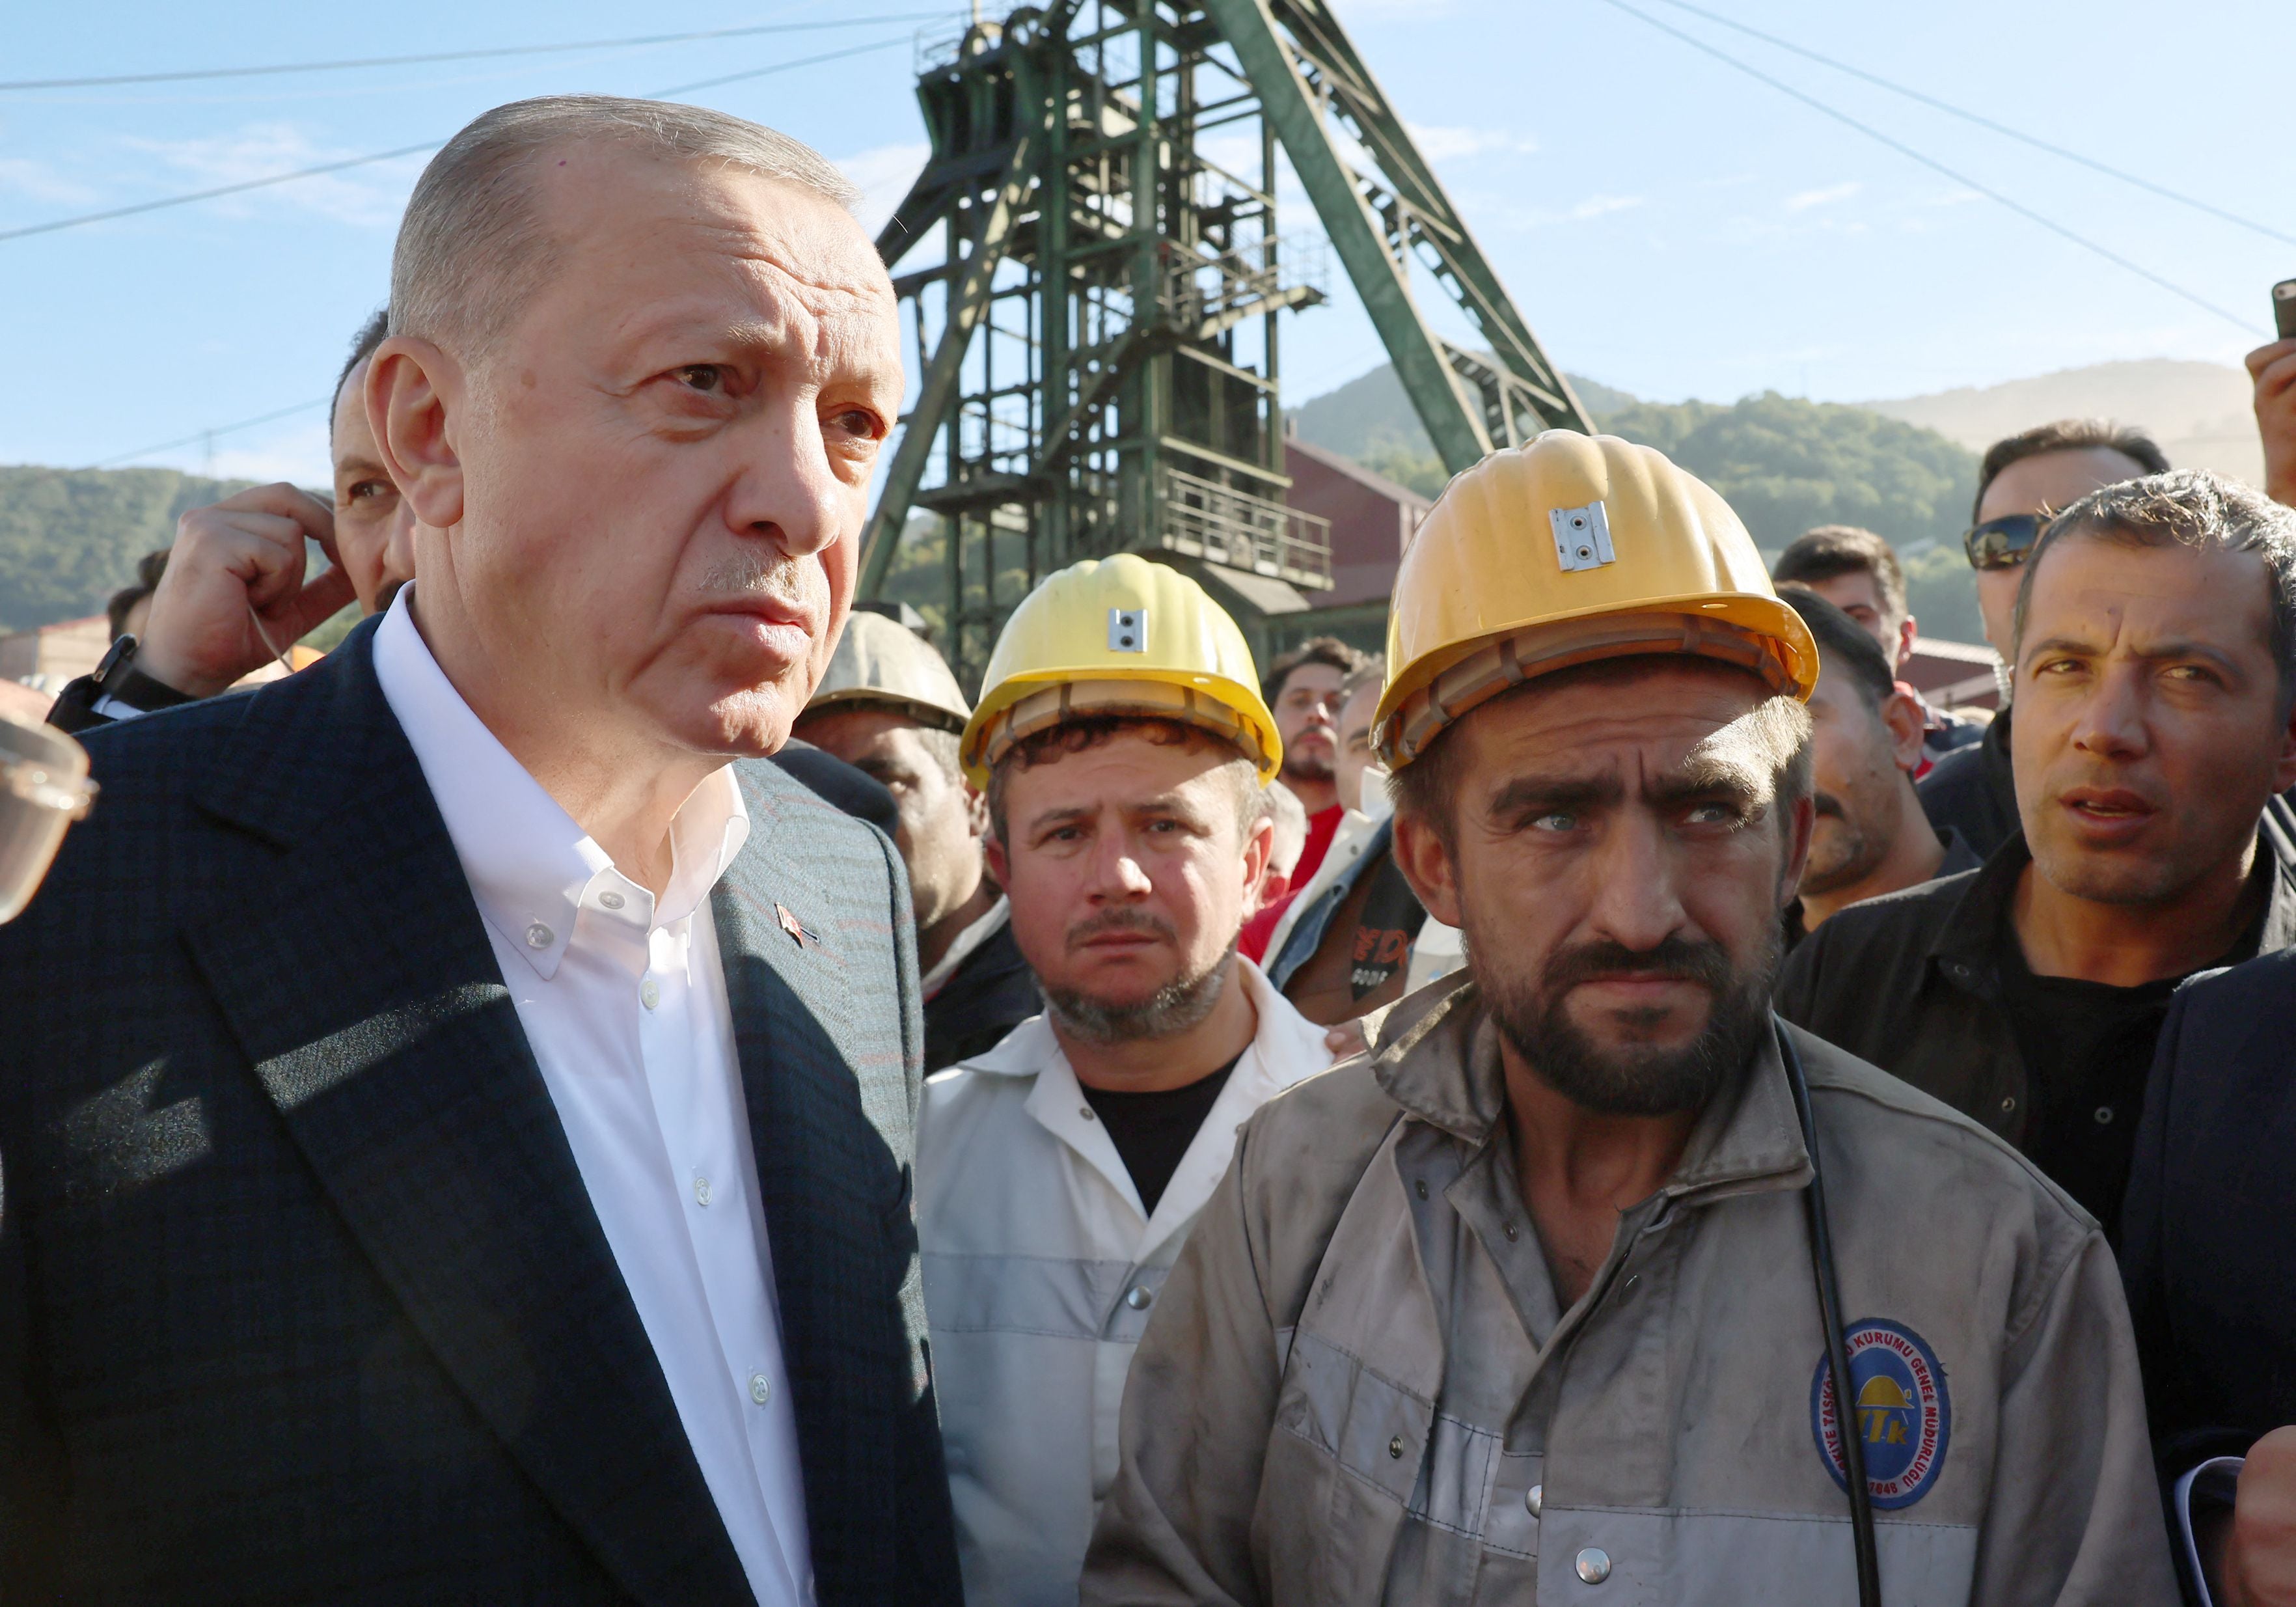 Turkish President Recep Tayyip Erdogan meets miners at the scene of the deadly explosion